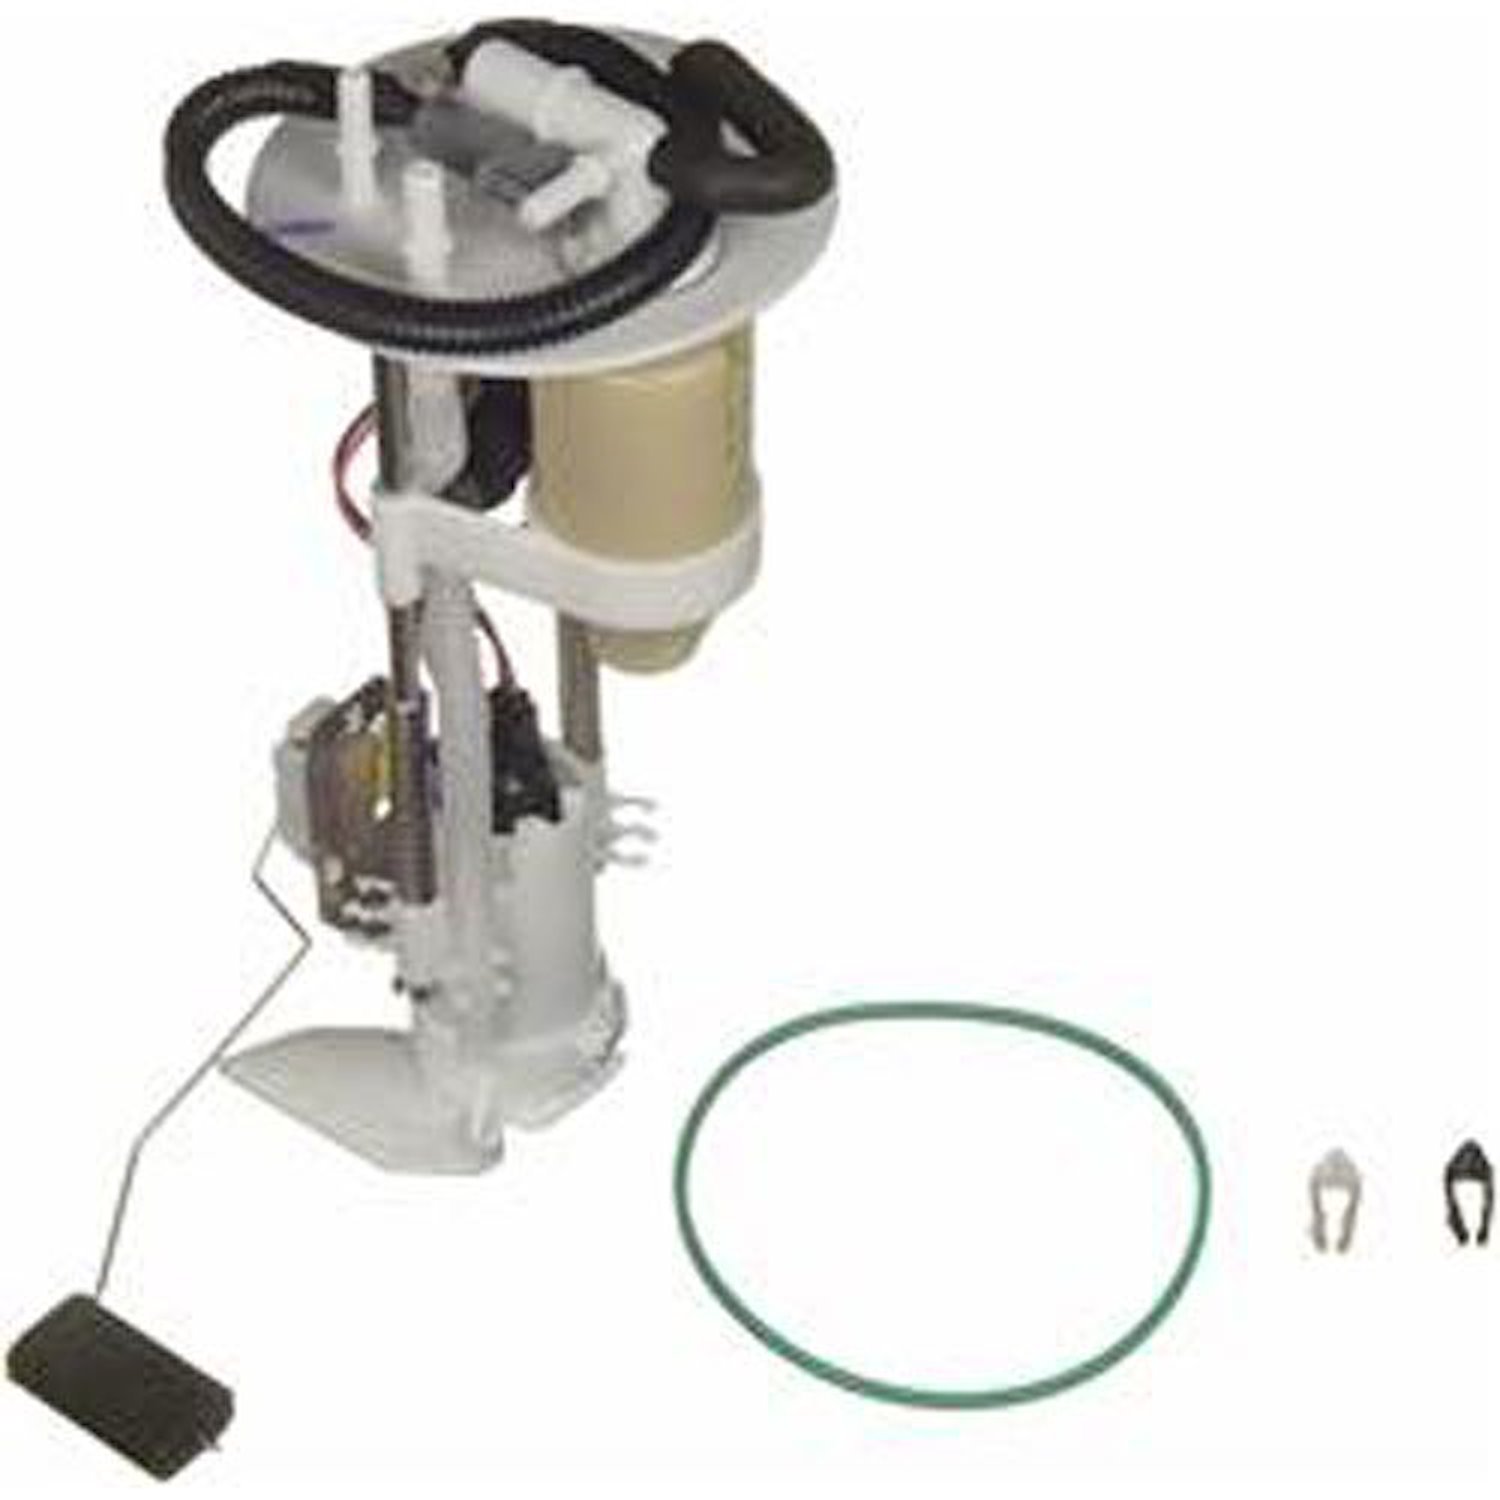 OE Ford Replacement Electric Fuel Pump Module Assembly 2001-03 Ford Ranger 2.3L 4 Cyl/3.0L/4.0L